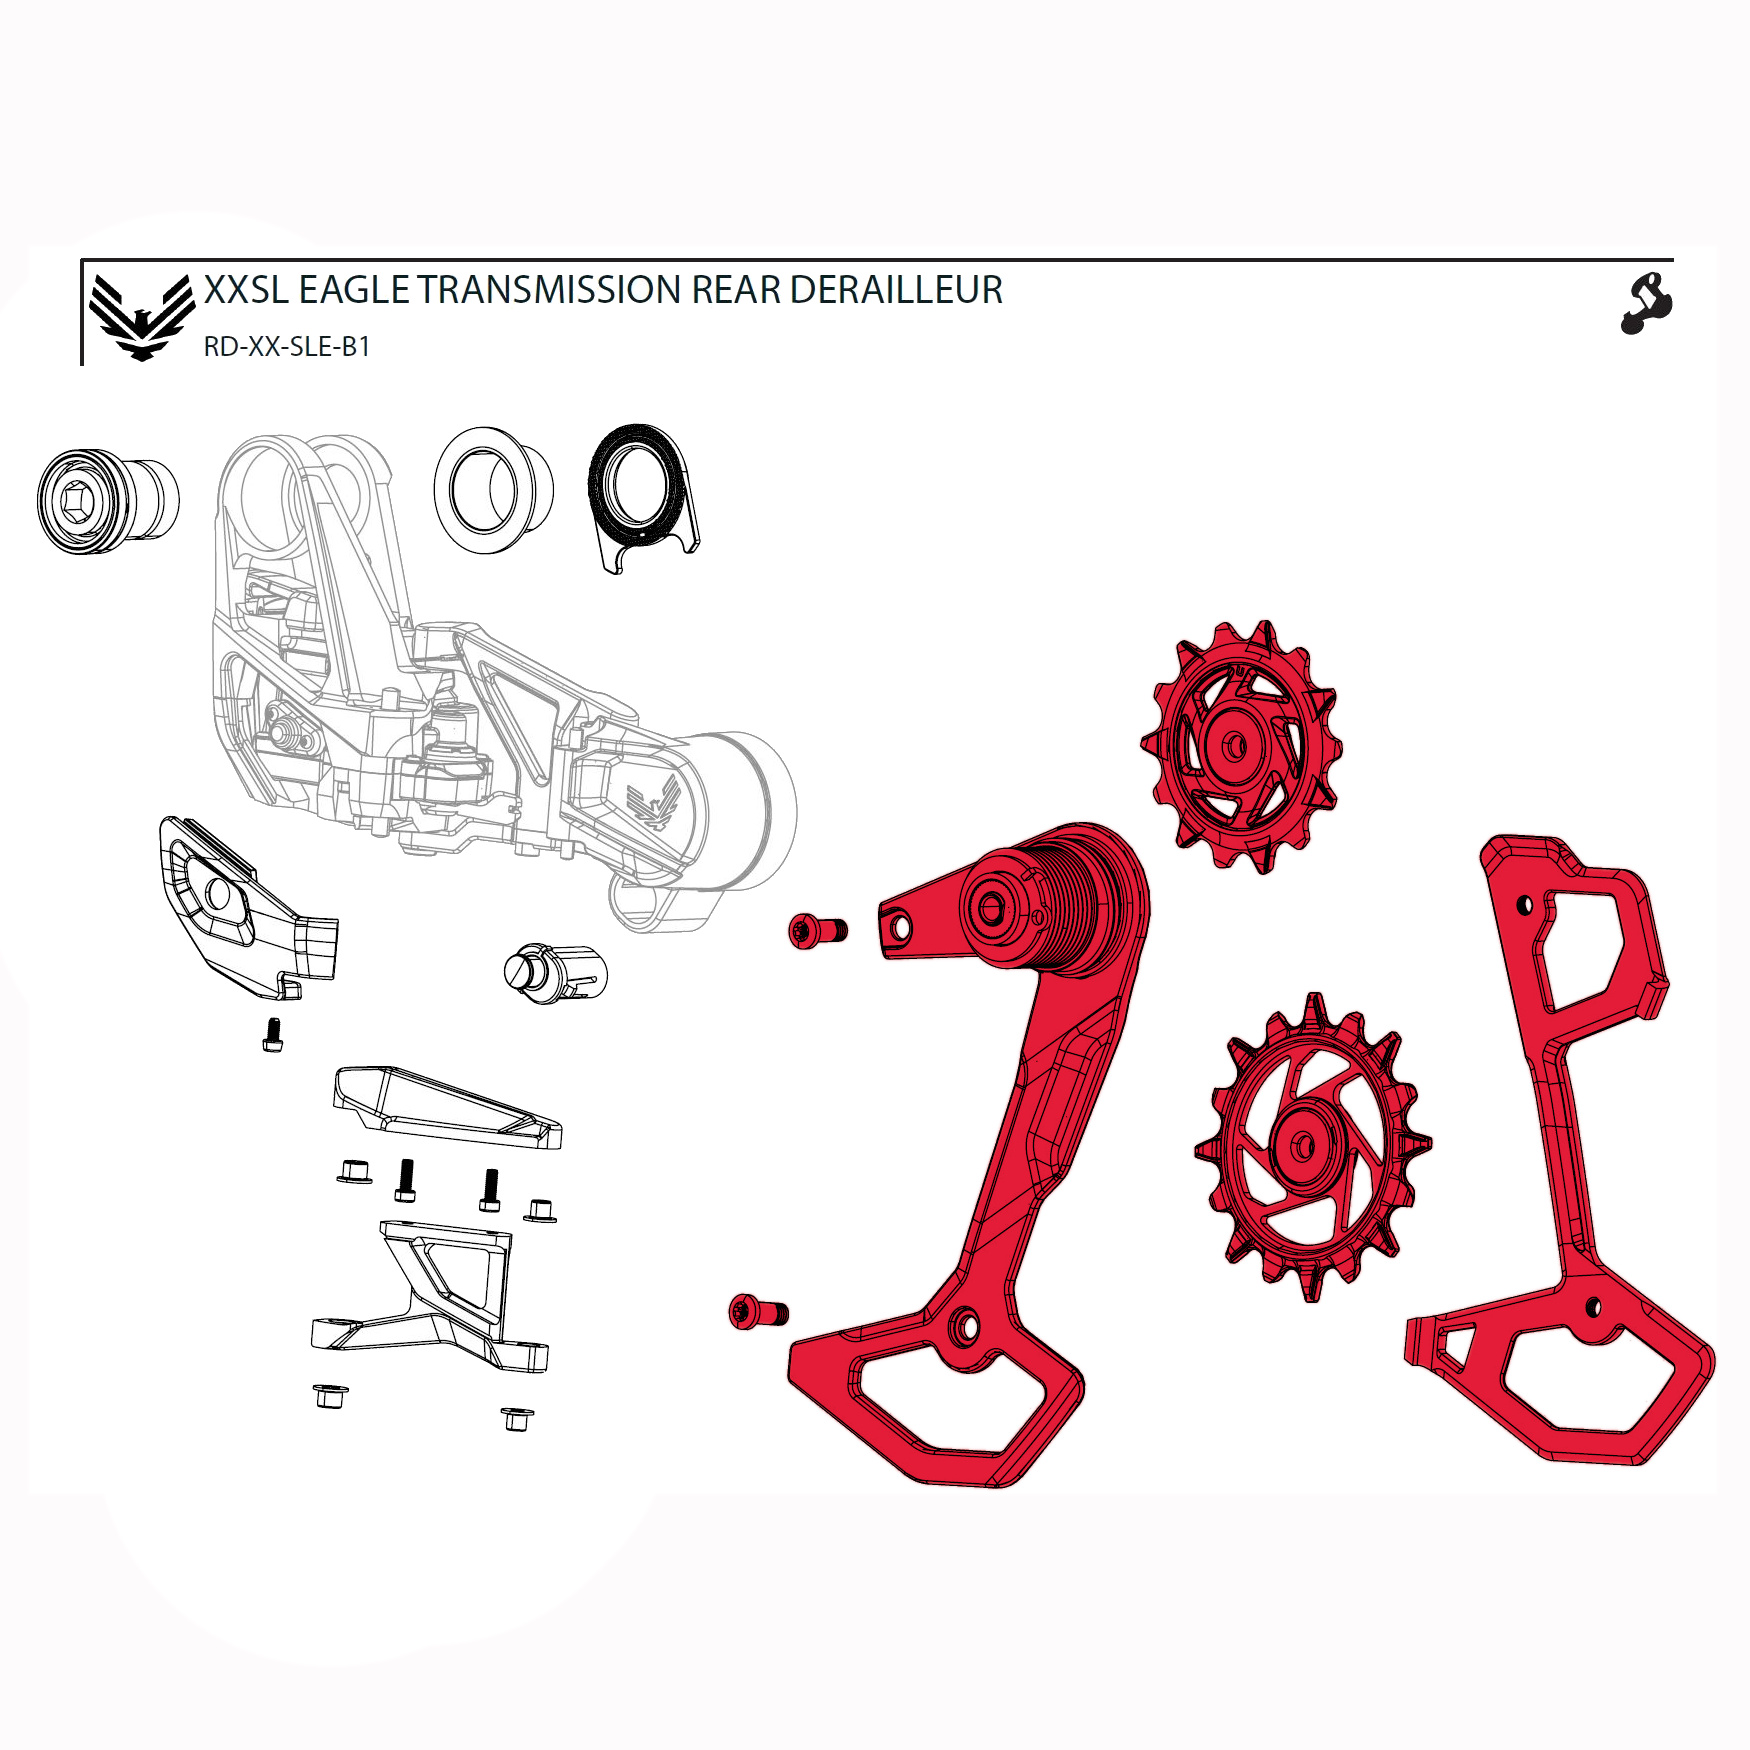 Picture of SRAM Cage Assembly Kit for XX SL Eagle Rear Derailleur - AXS | T-Type | B1 - 11.7518.104.010